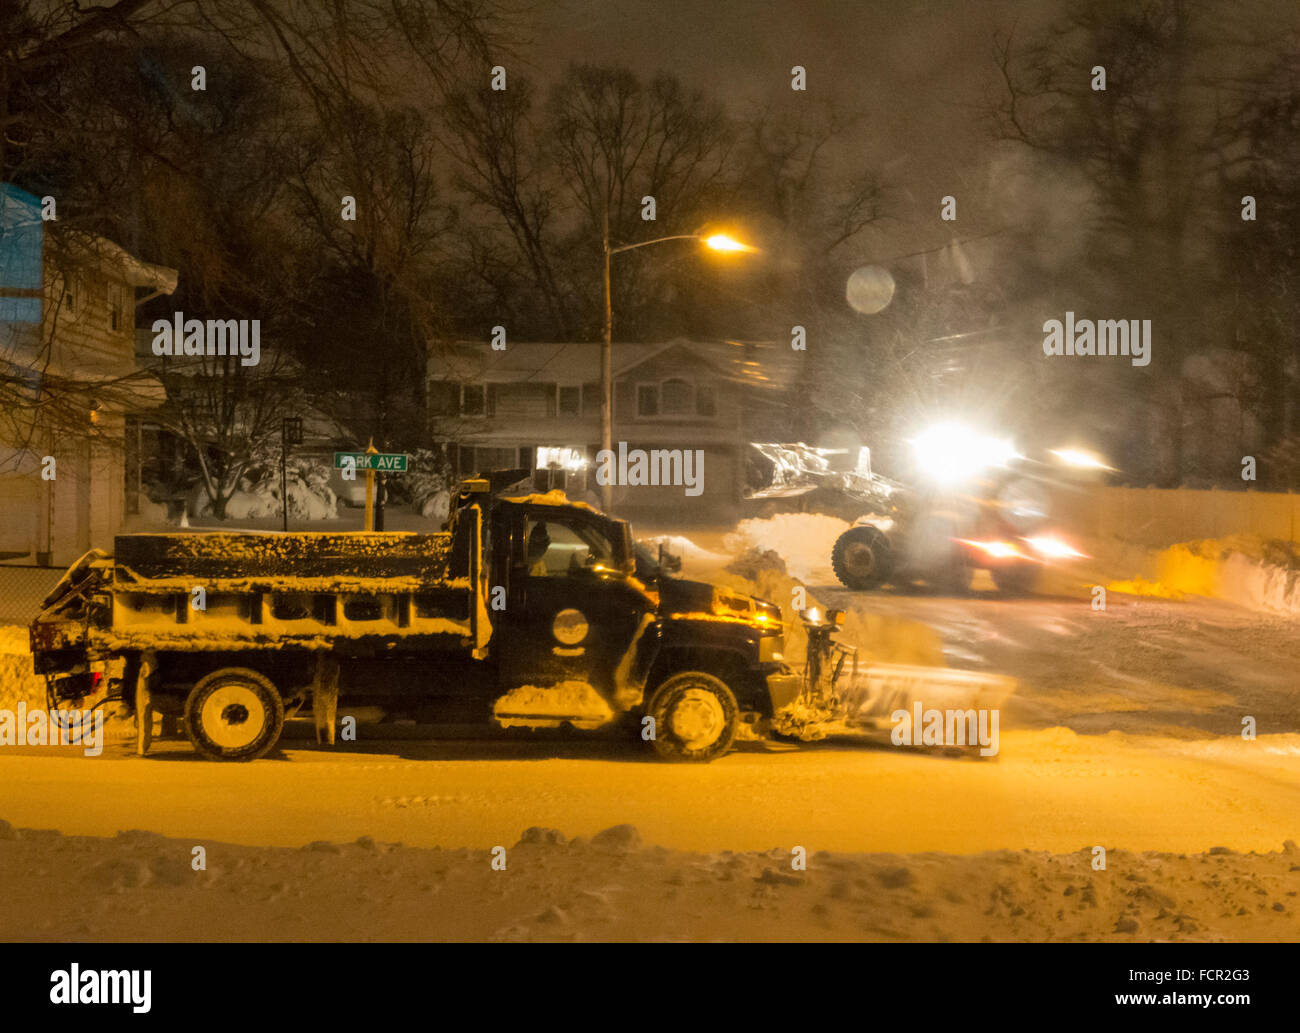 Merrick, New York, USA. 24rd January 2016. Two Town of Hempstead snowplows, a small one plowing out a cul de sac, dead end side street, and a large plow on the bigger road leading to it, are clearing roads while Blizzard Jonas continues to bring dangerous snow and gusting winds to Long Island. Gov. Cuomo banned travel, shutting down L.I.'s roads and railroads, due to hazardous conditions, and the winter Storm of 2016 has already dropped about two feet of snow on the south shore town. Credit:  Ann E Parry/Alamy Live News Stock Photo